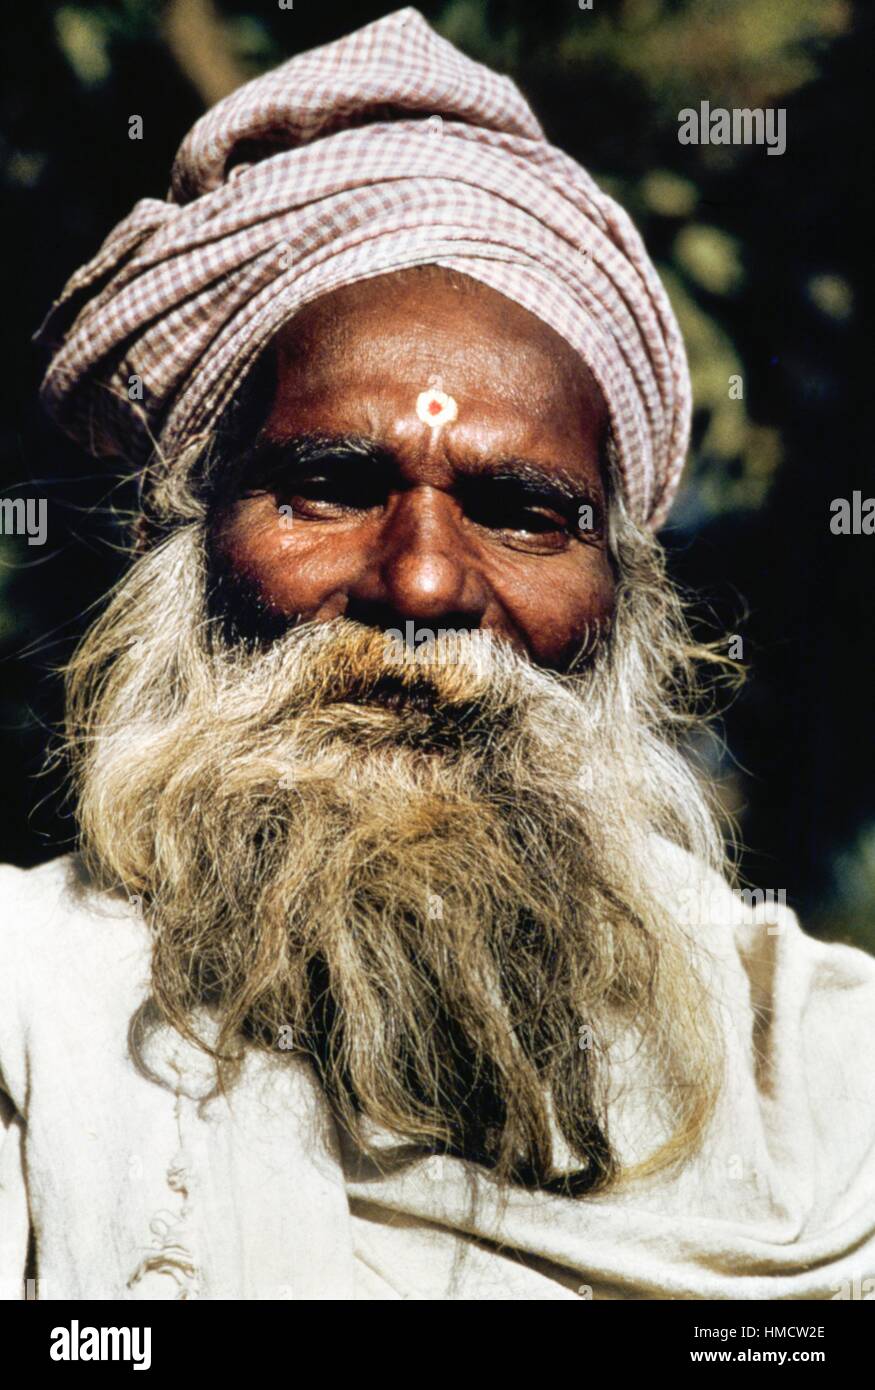 Old man with beard and turban, Chandigarh, India. Stock Photo